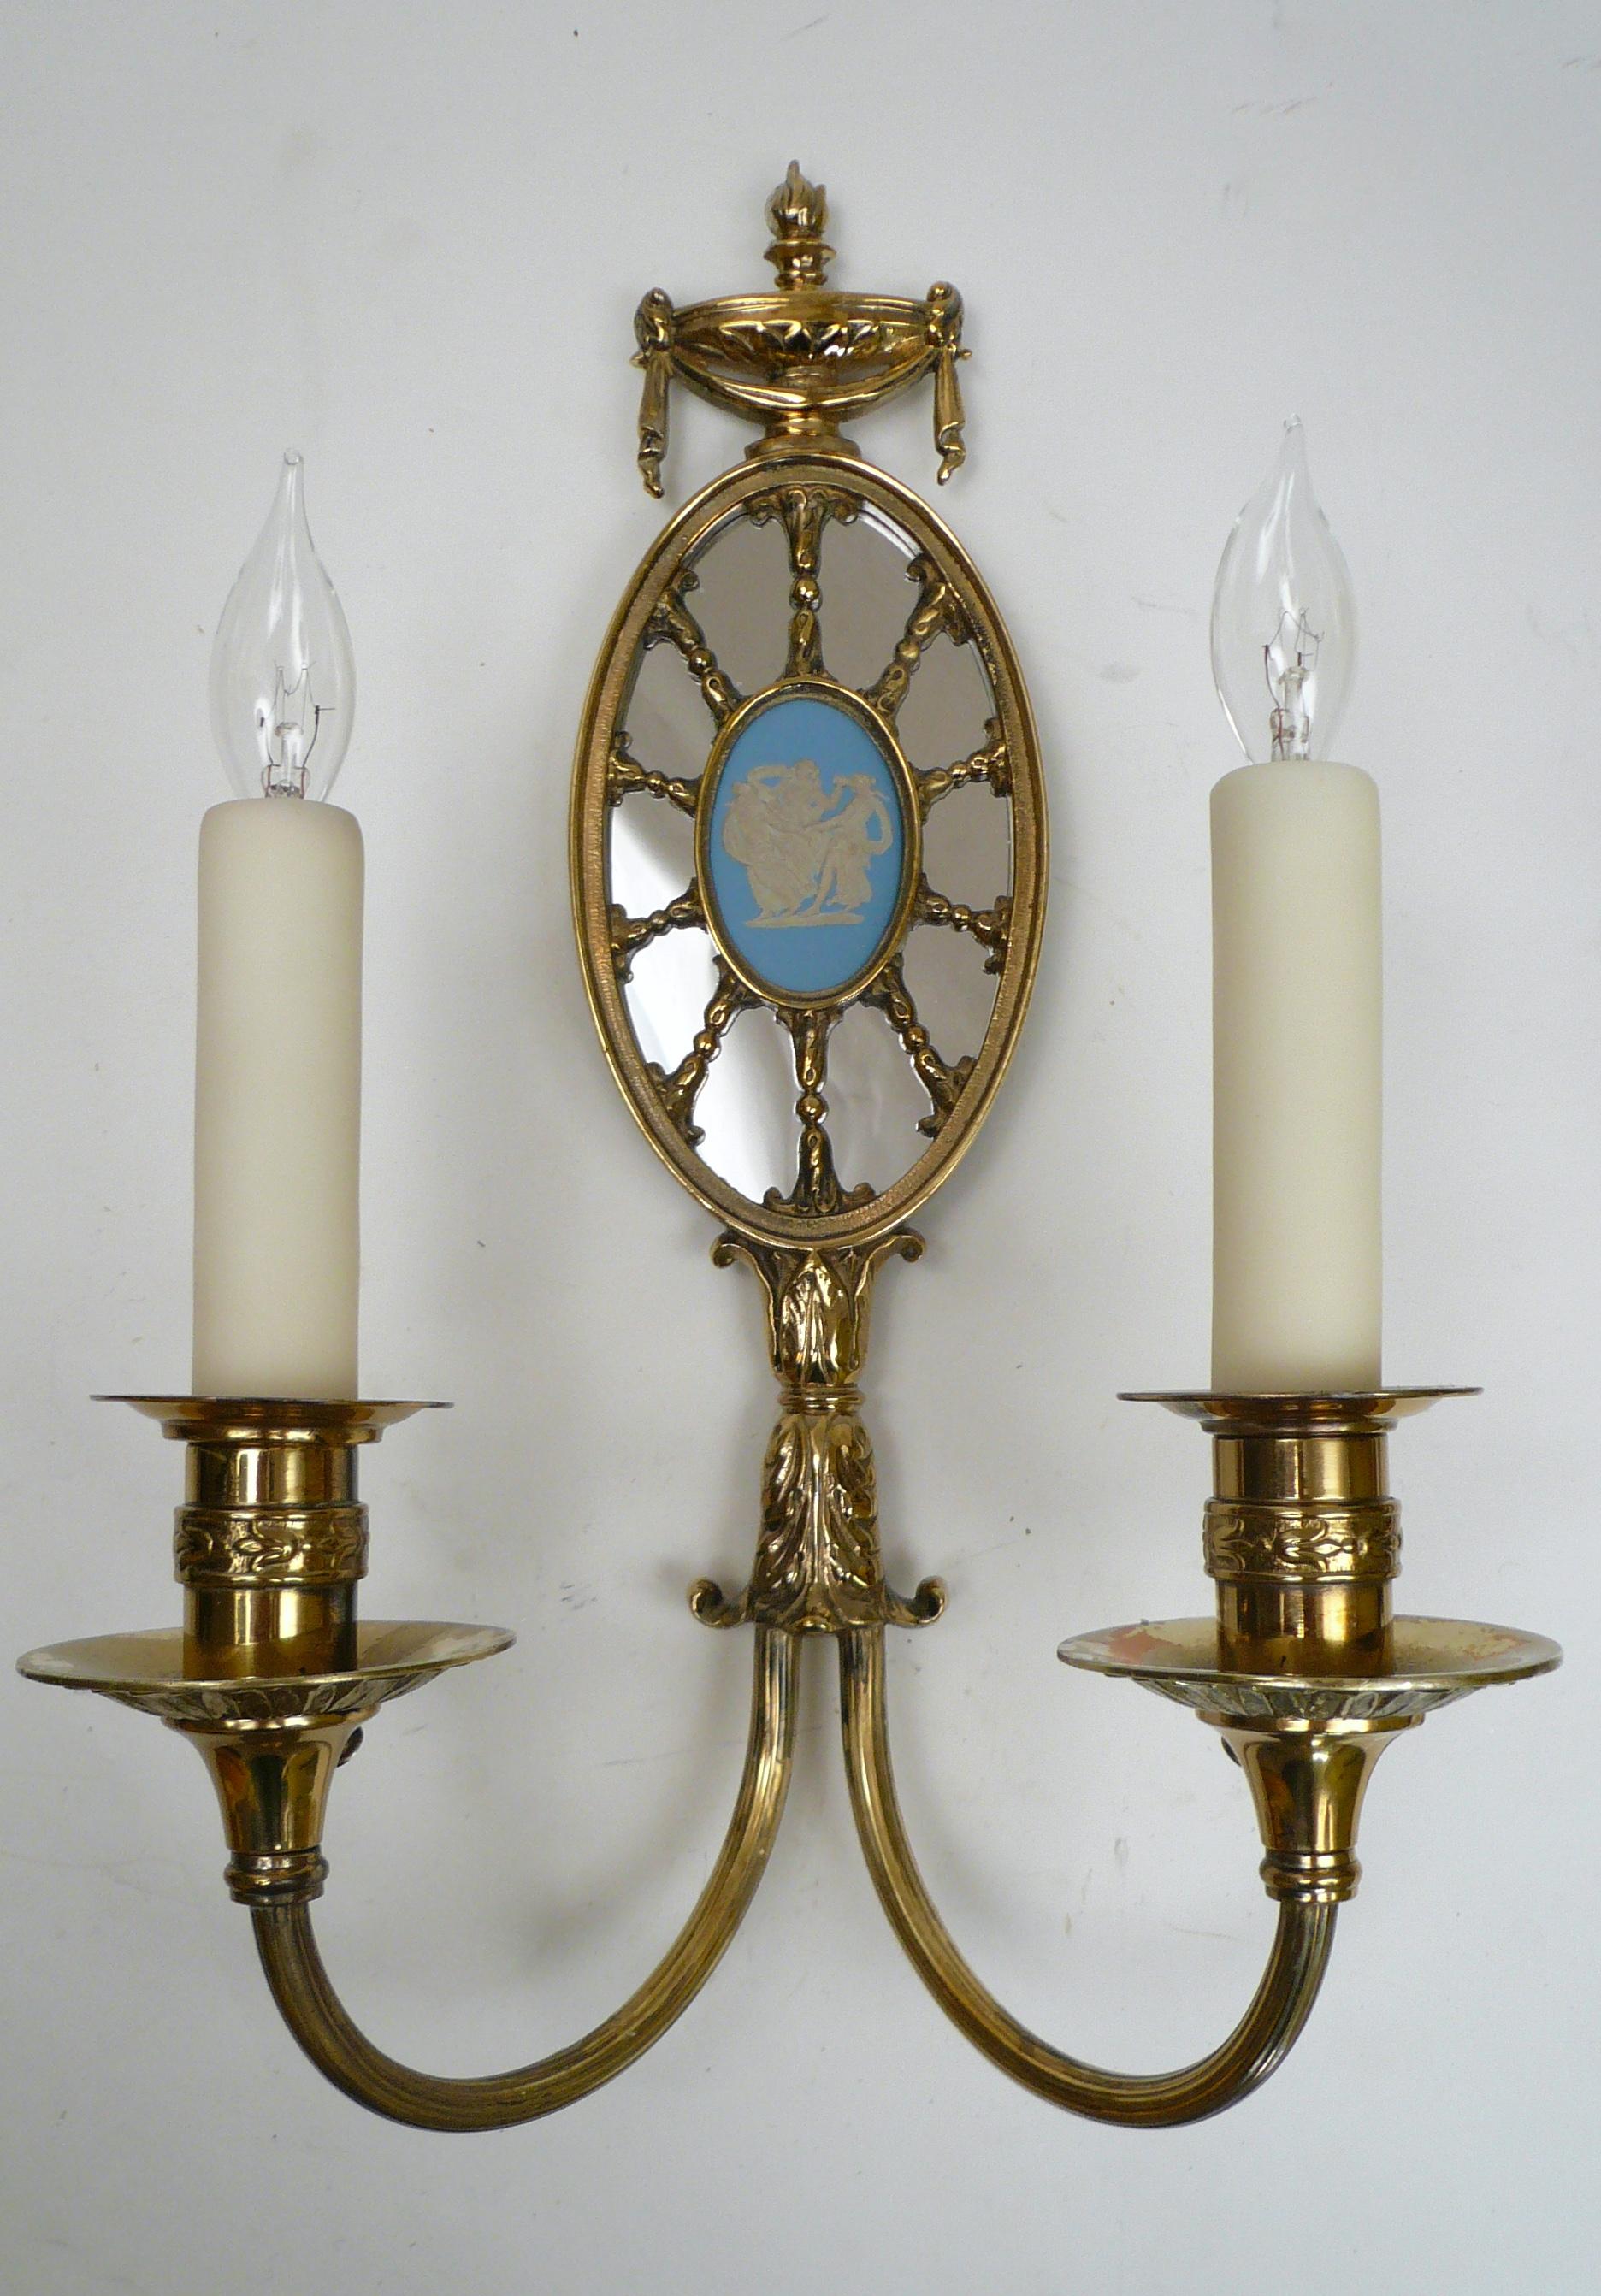 4 Pairs Adam Style Mirrored Sconces with Wedgwood Plaques Attributed to Caldwell For Sale 2